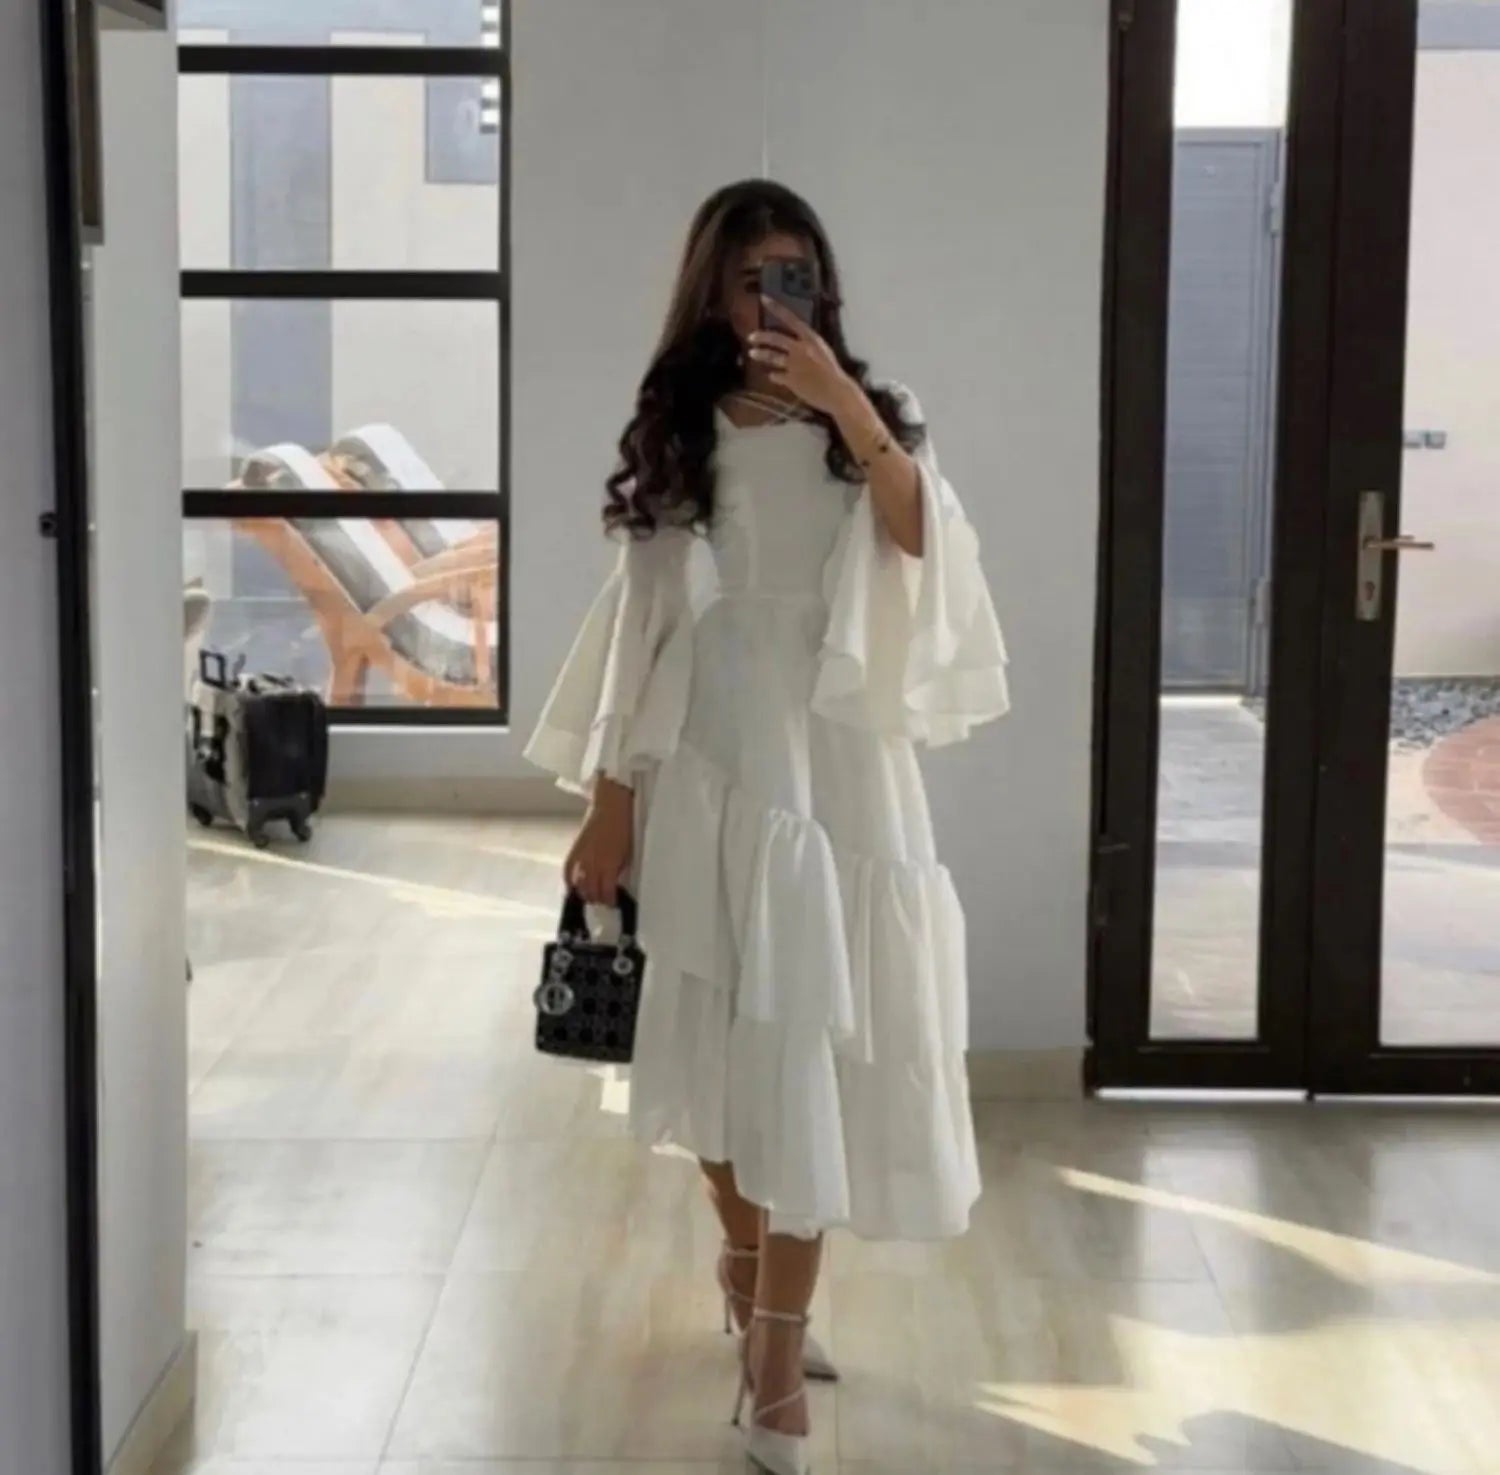 Aileen Layered Party Dresses for Women Evening Dress Party Evening Elegant Luxury Celebrity Line A Ruffles White Eid Al-fitr